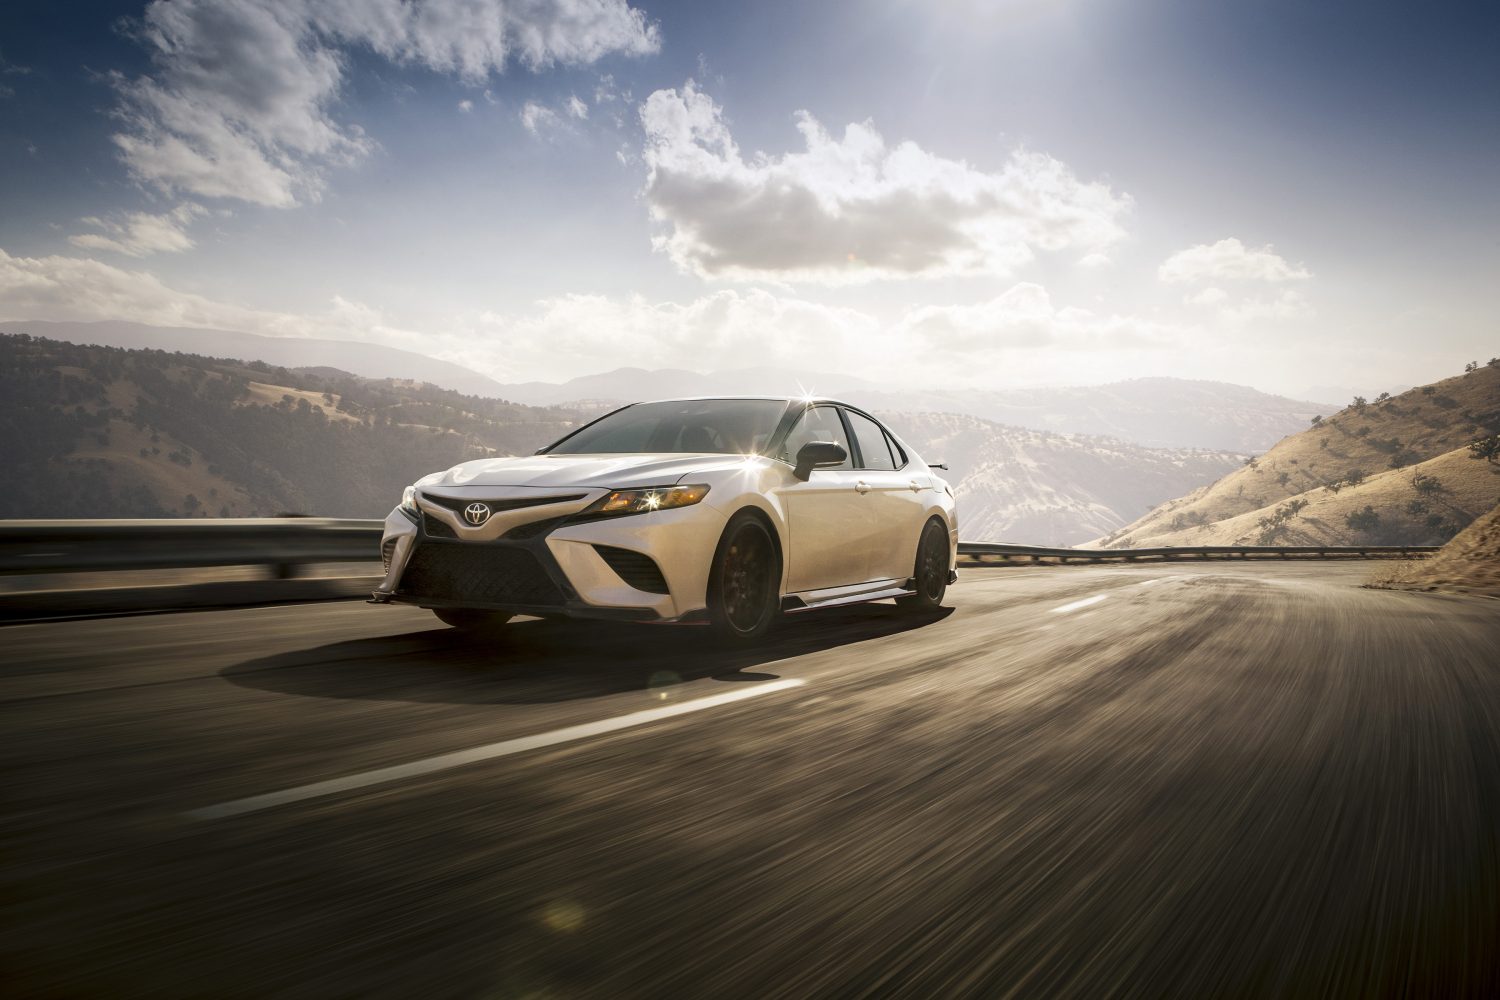 Toyota Camry Leads Midsize Sedan Segment While Revving It Up With